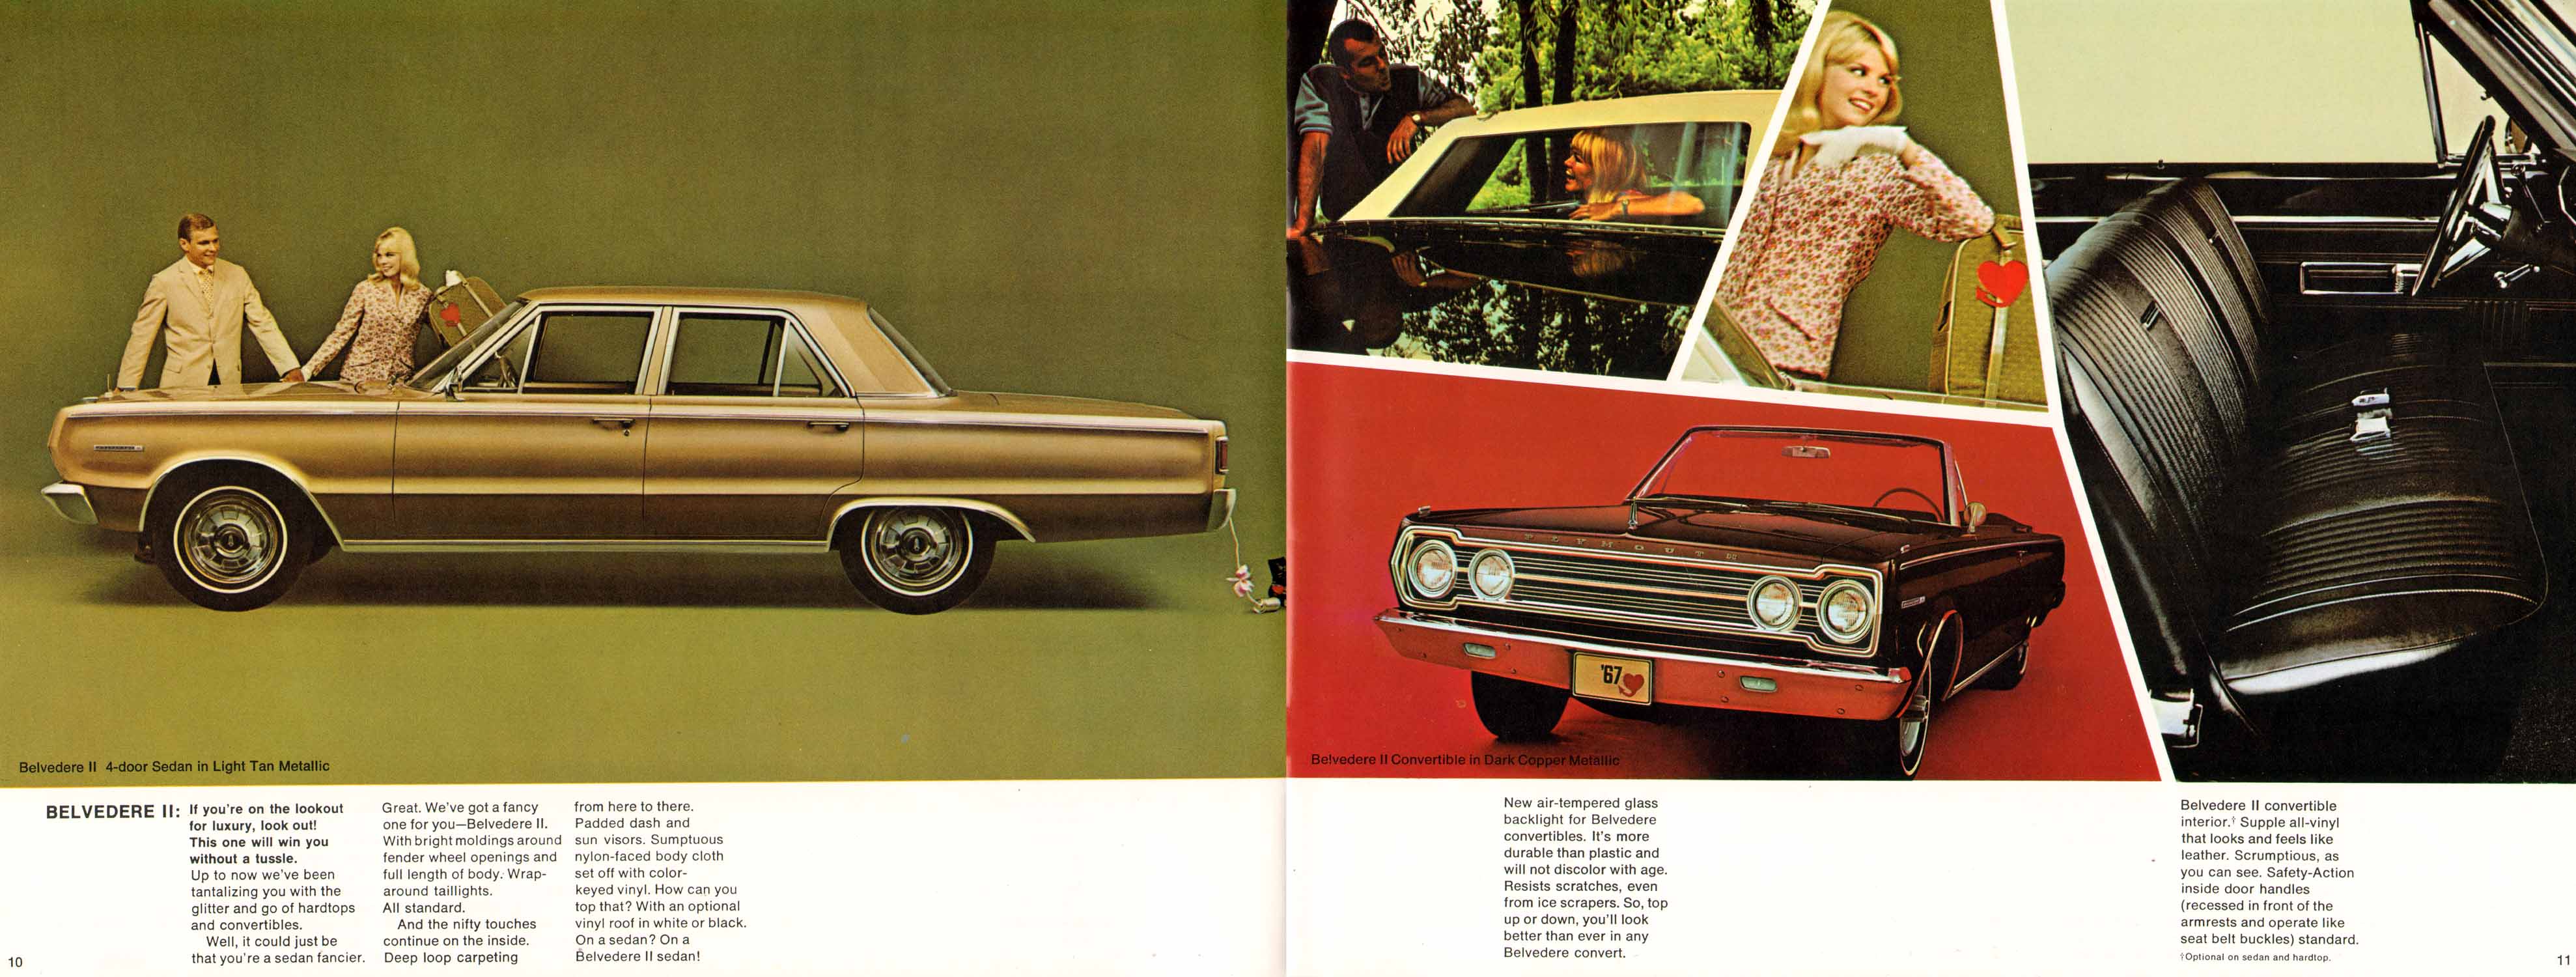 1967 Plymouth Belvedere-10-11